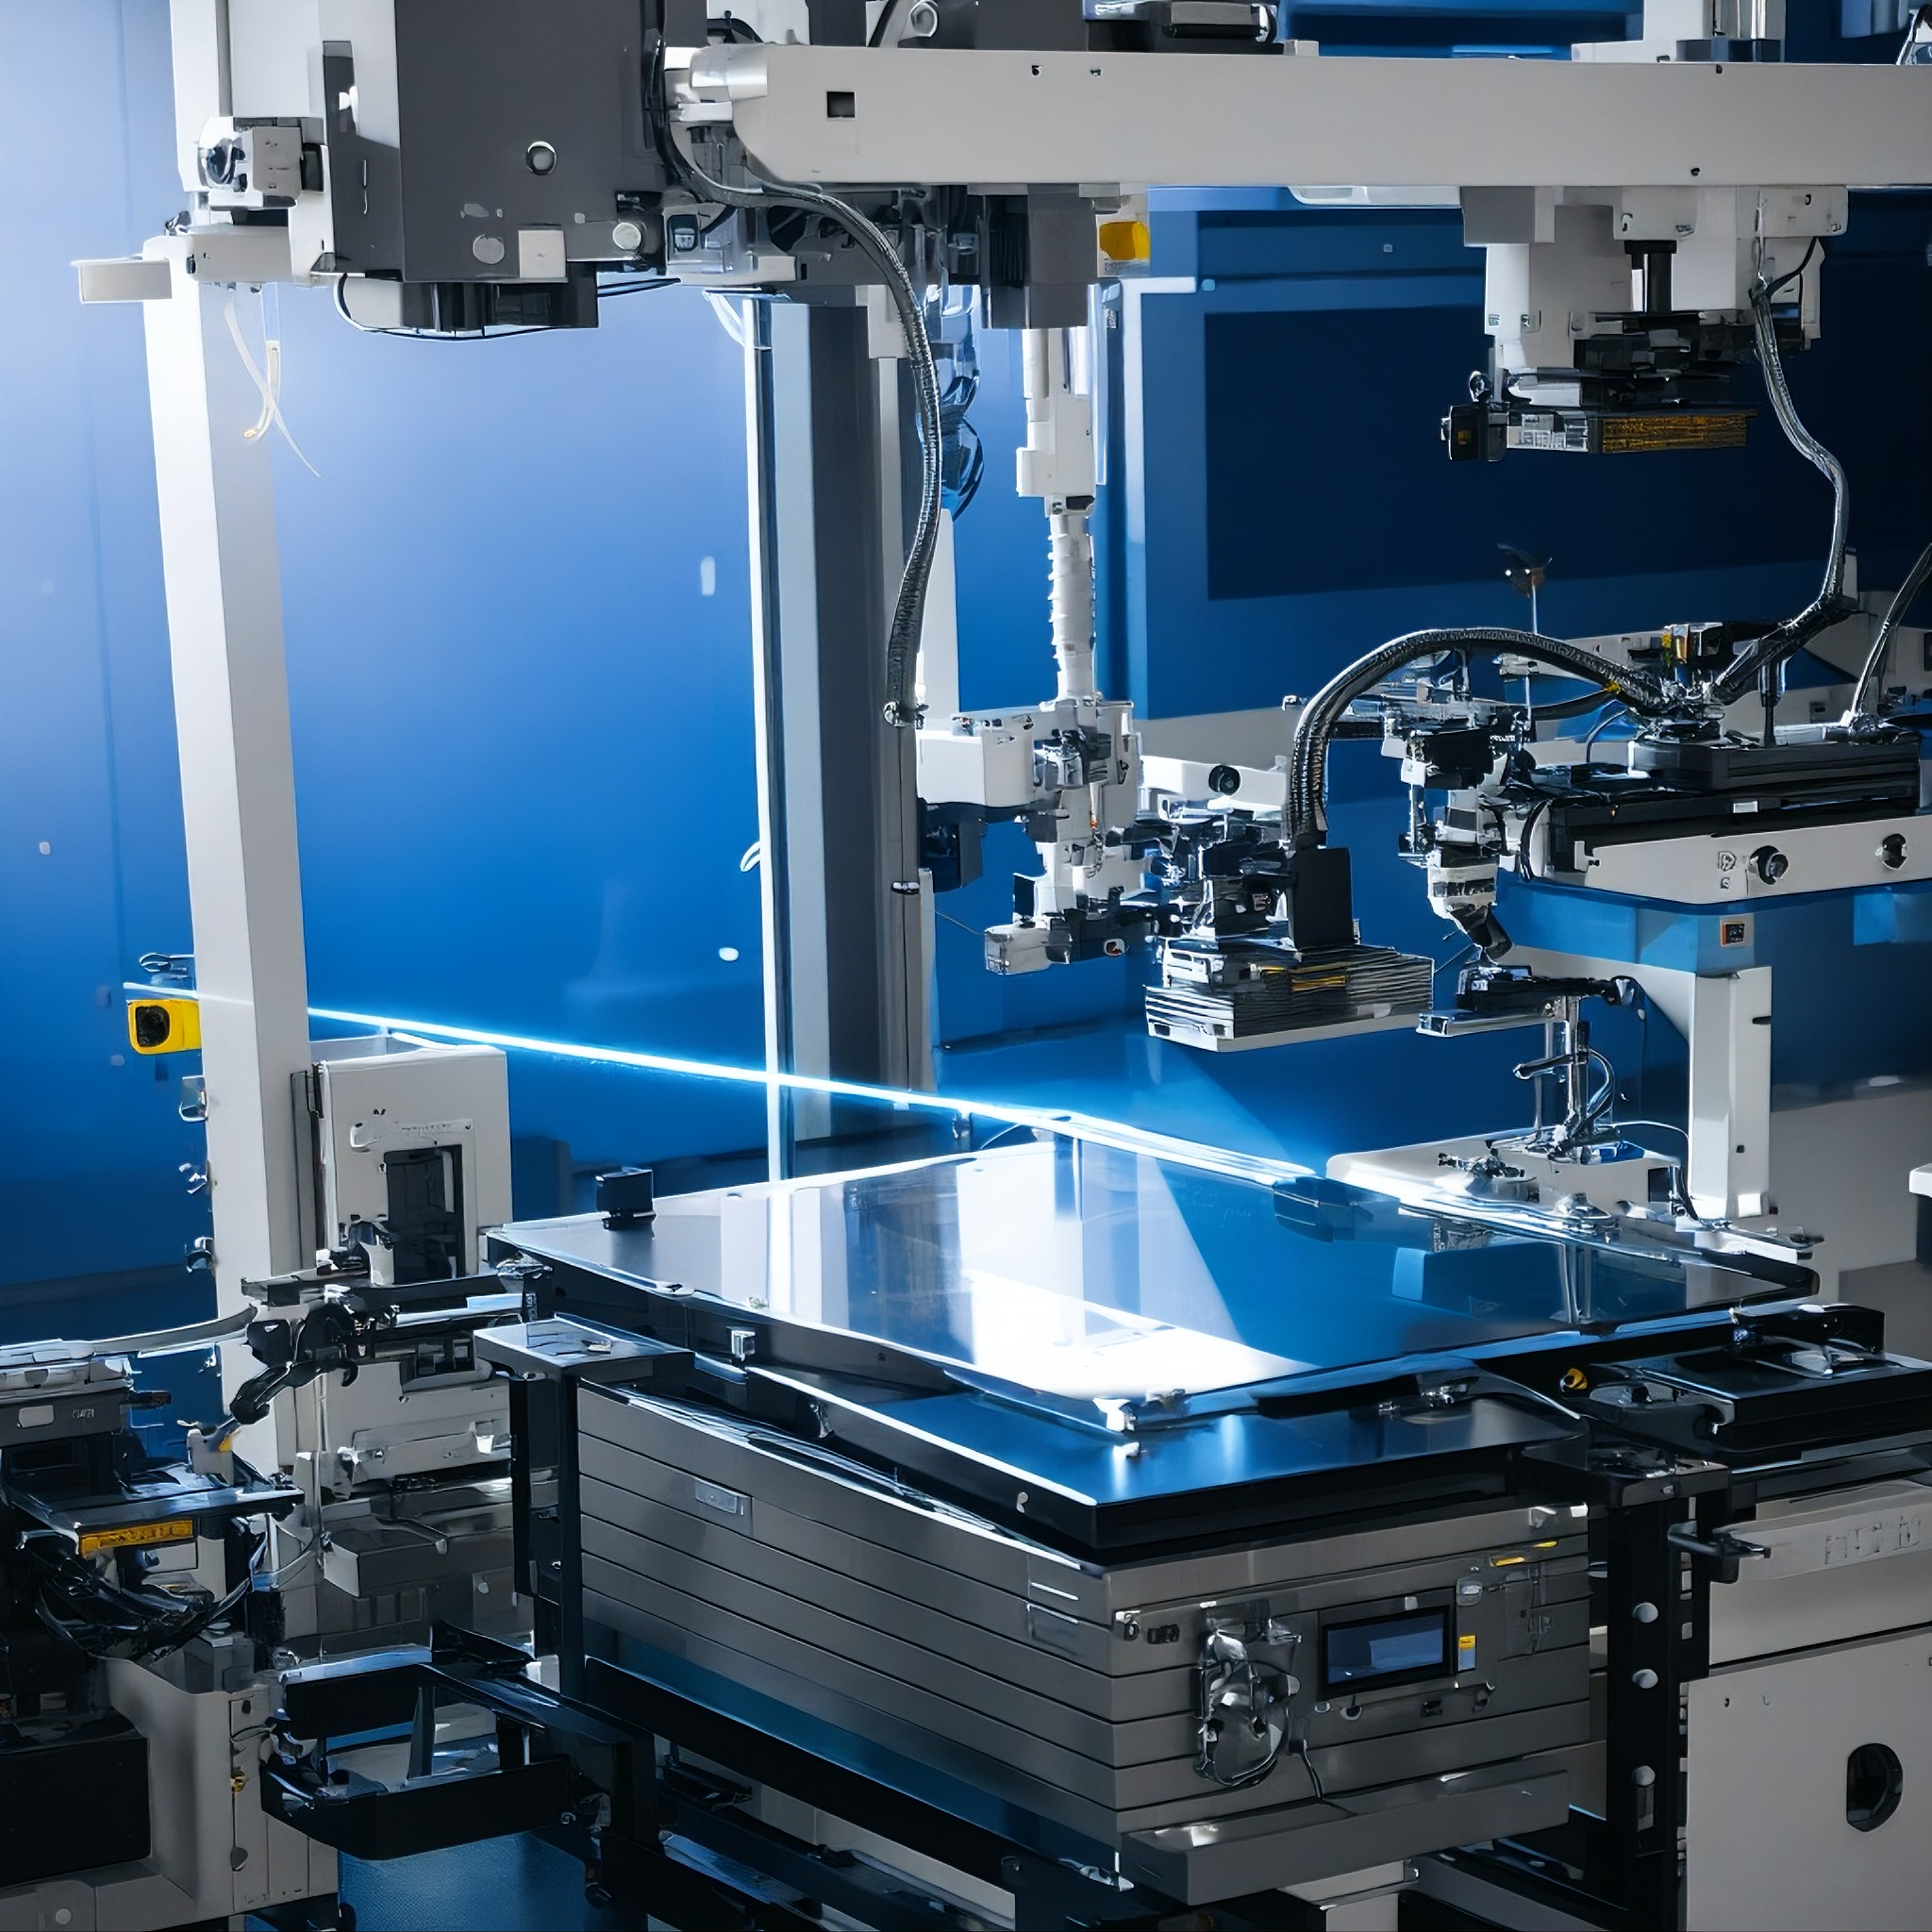 LCD Panels in Smart Manufacturing